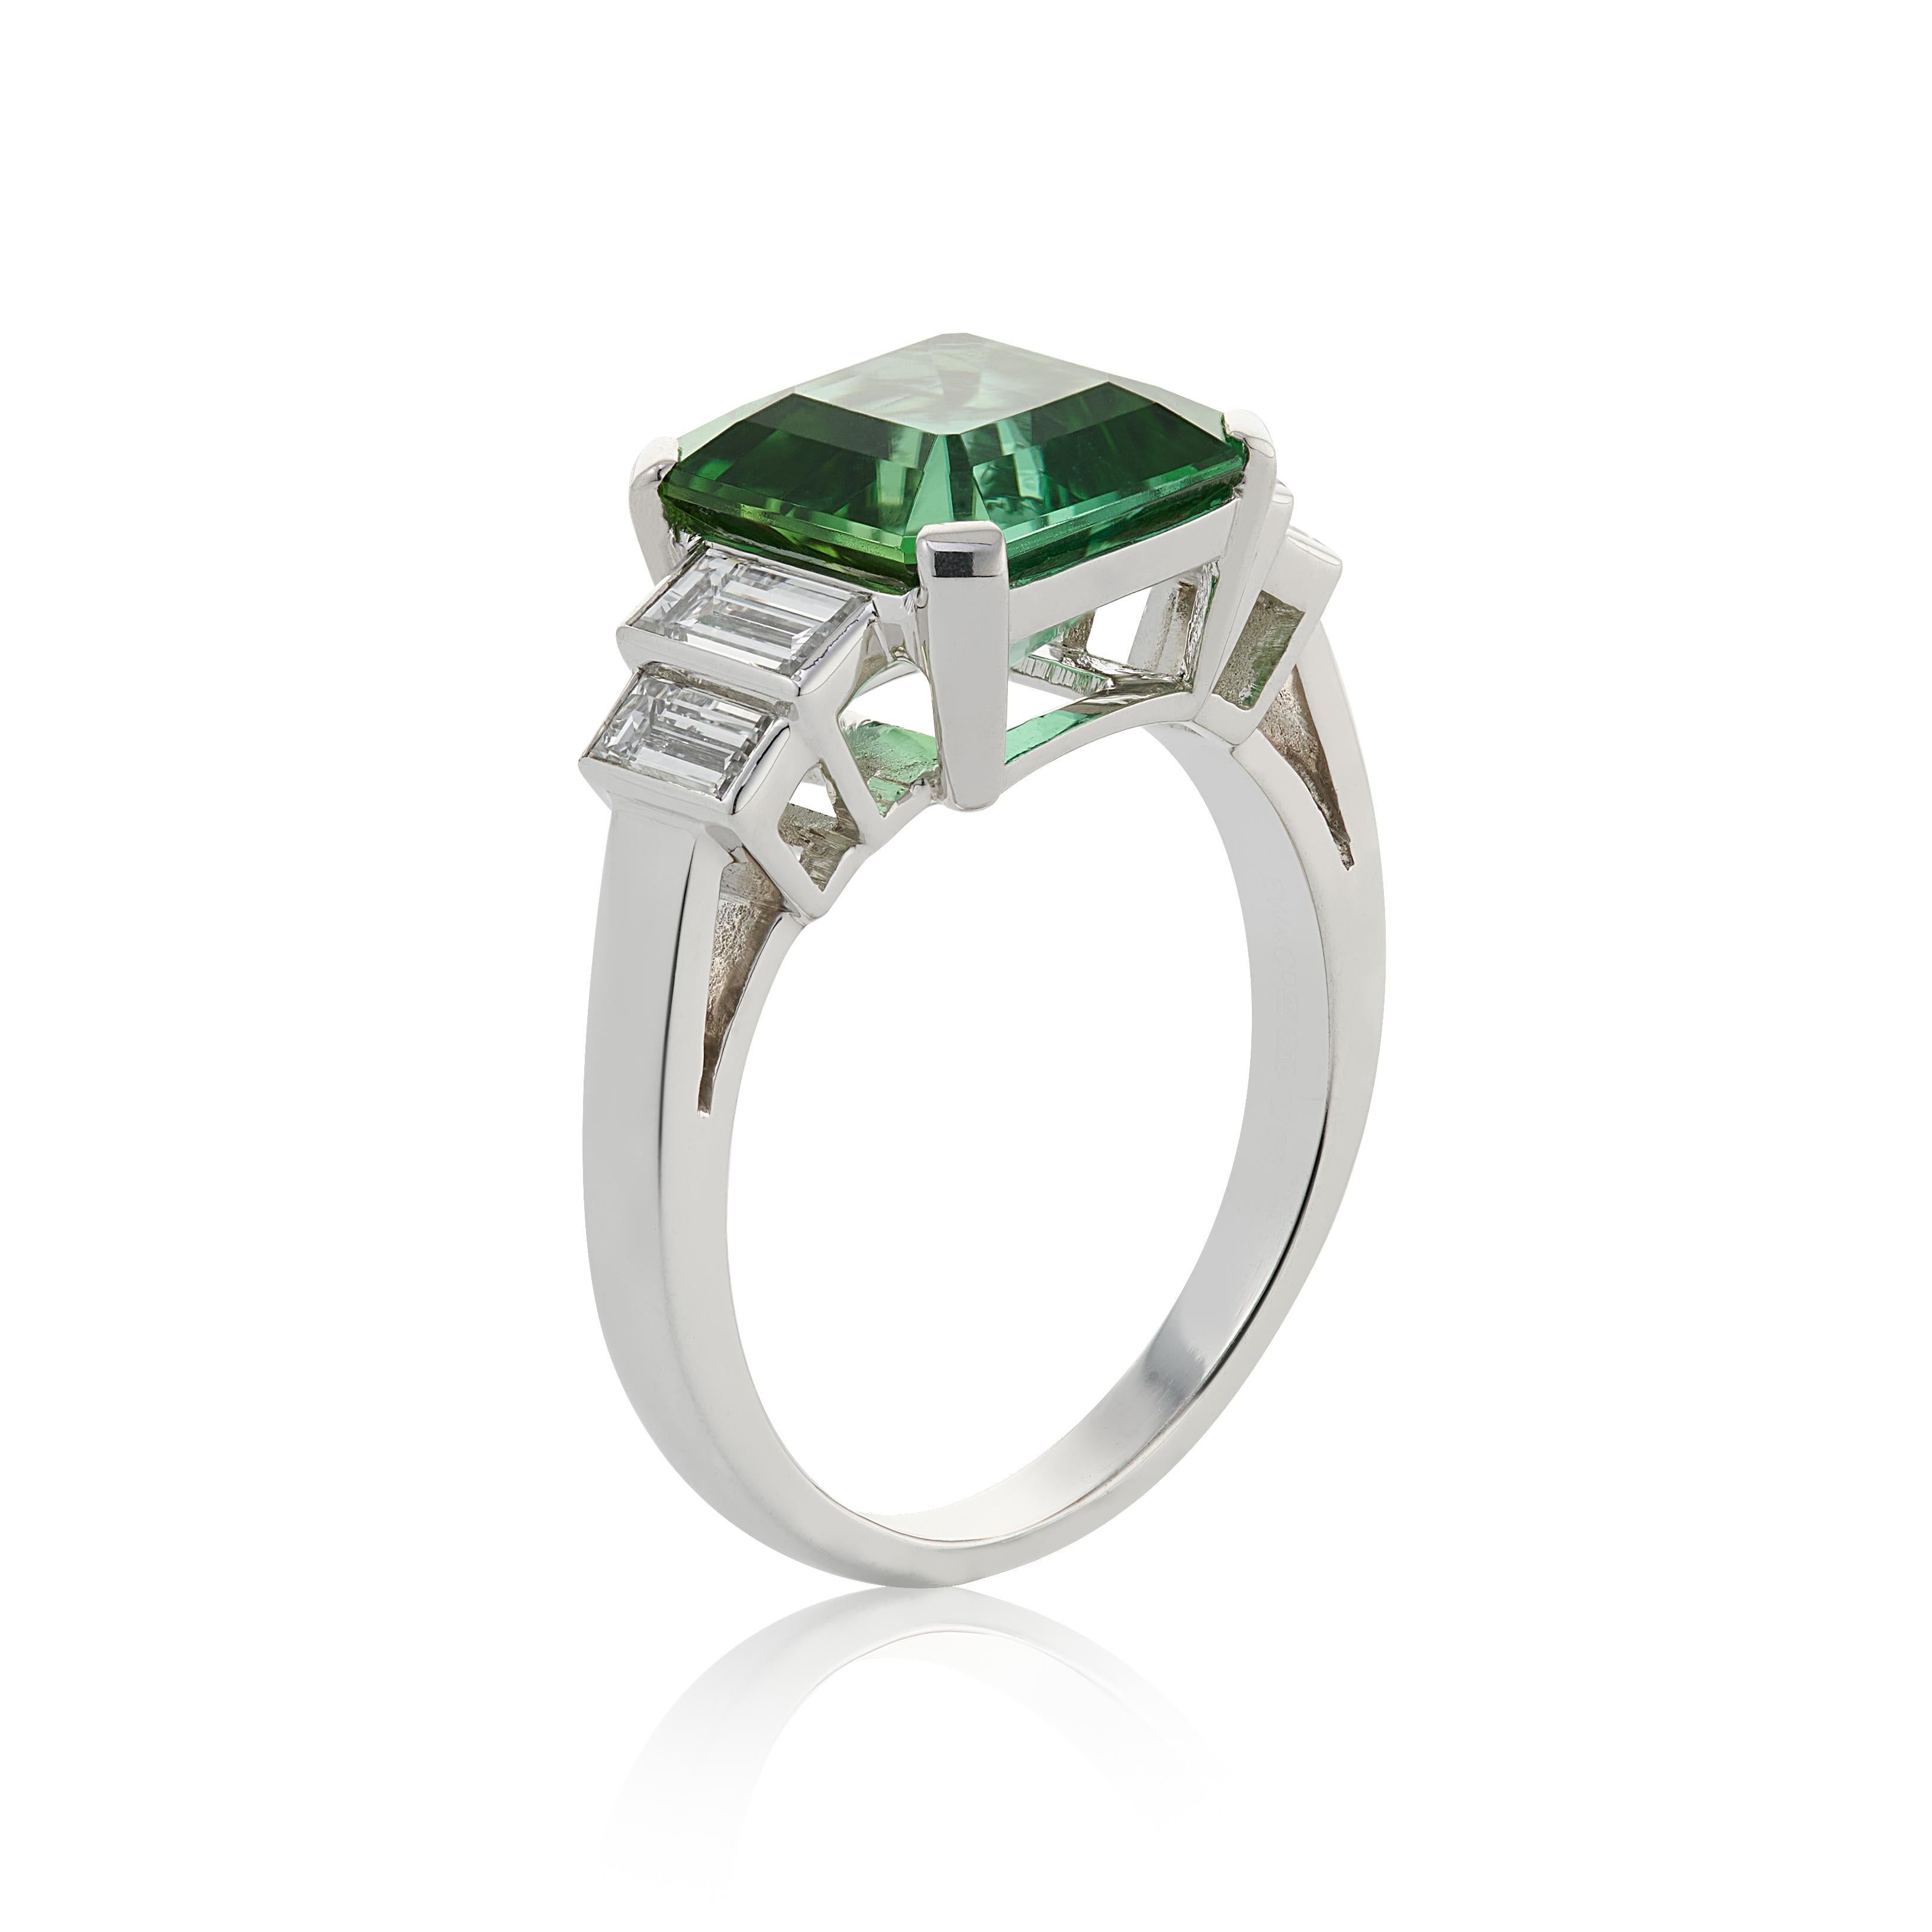 E Wolfe & Company Handmade 18ct White Gold Green Tourmaline and Diamond Baguette Ring. The green tourmaline centre stone weighs 3.59 carats and has two pairs of baguettes diamonds set to either side. The baguette diamonds have a total weight of .73